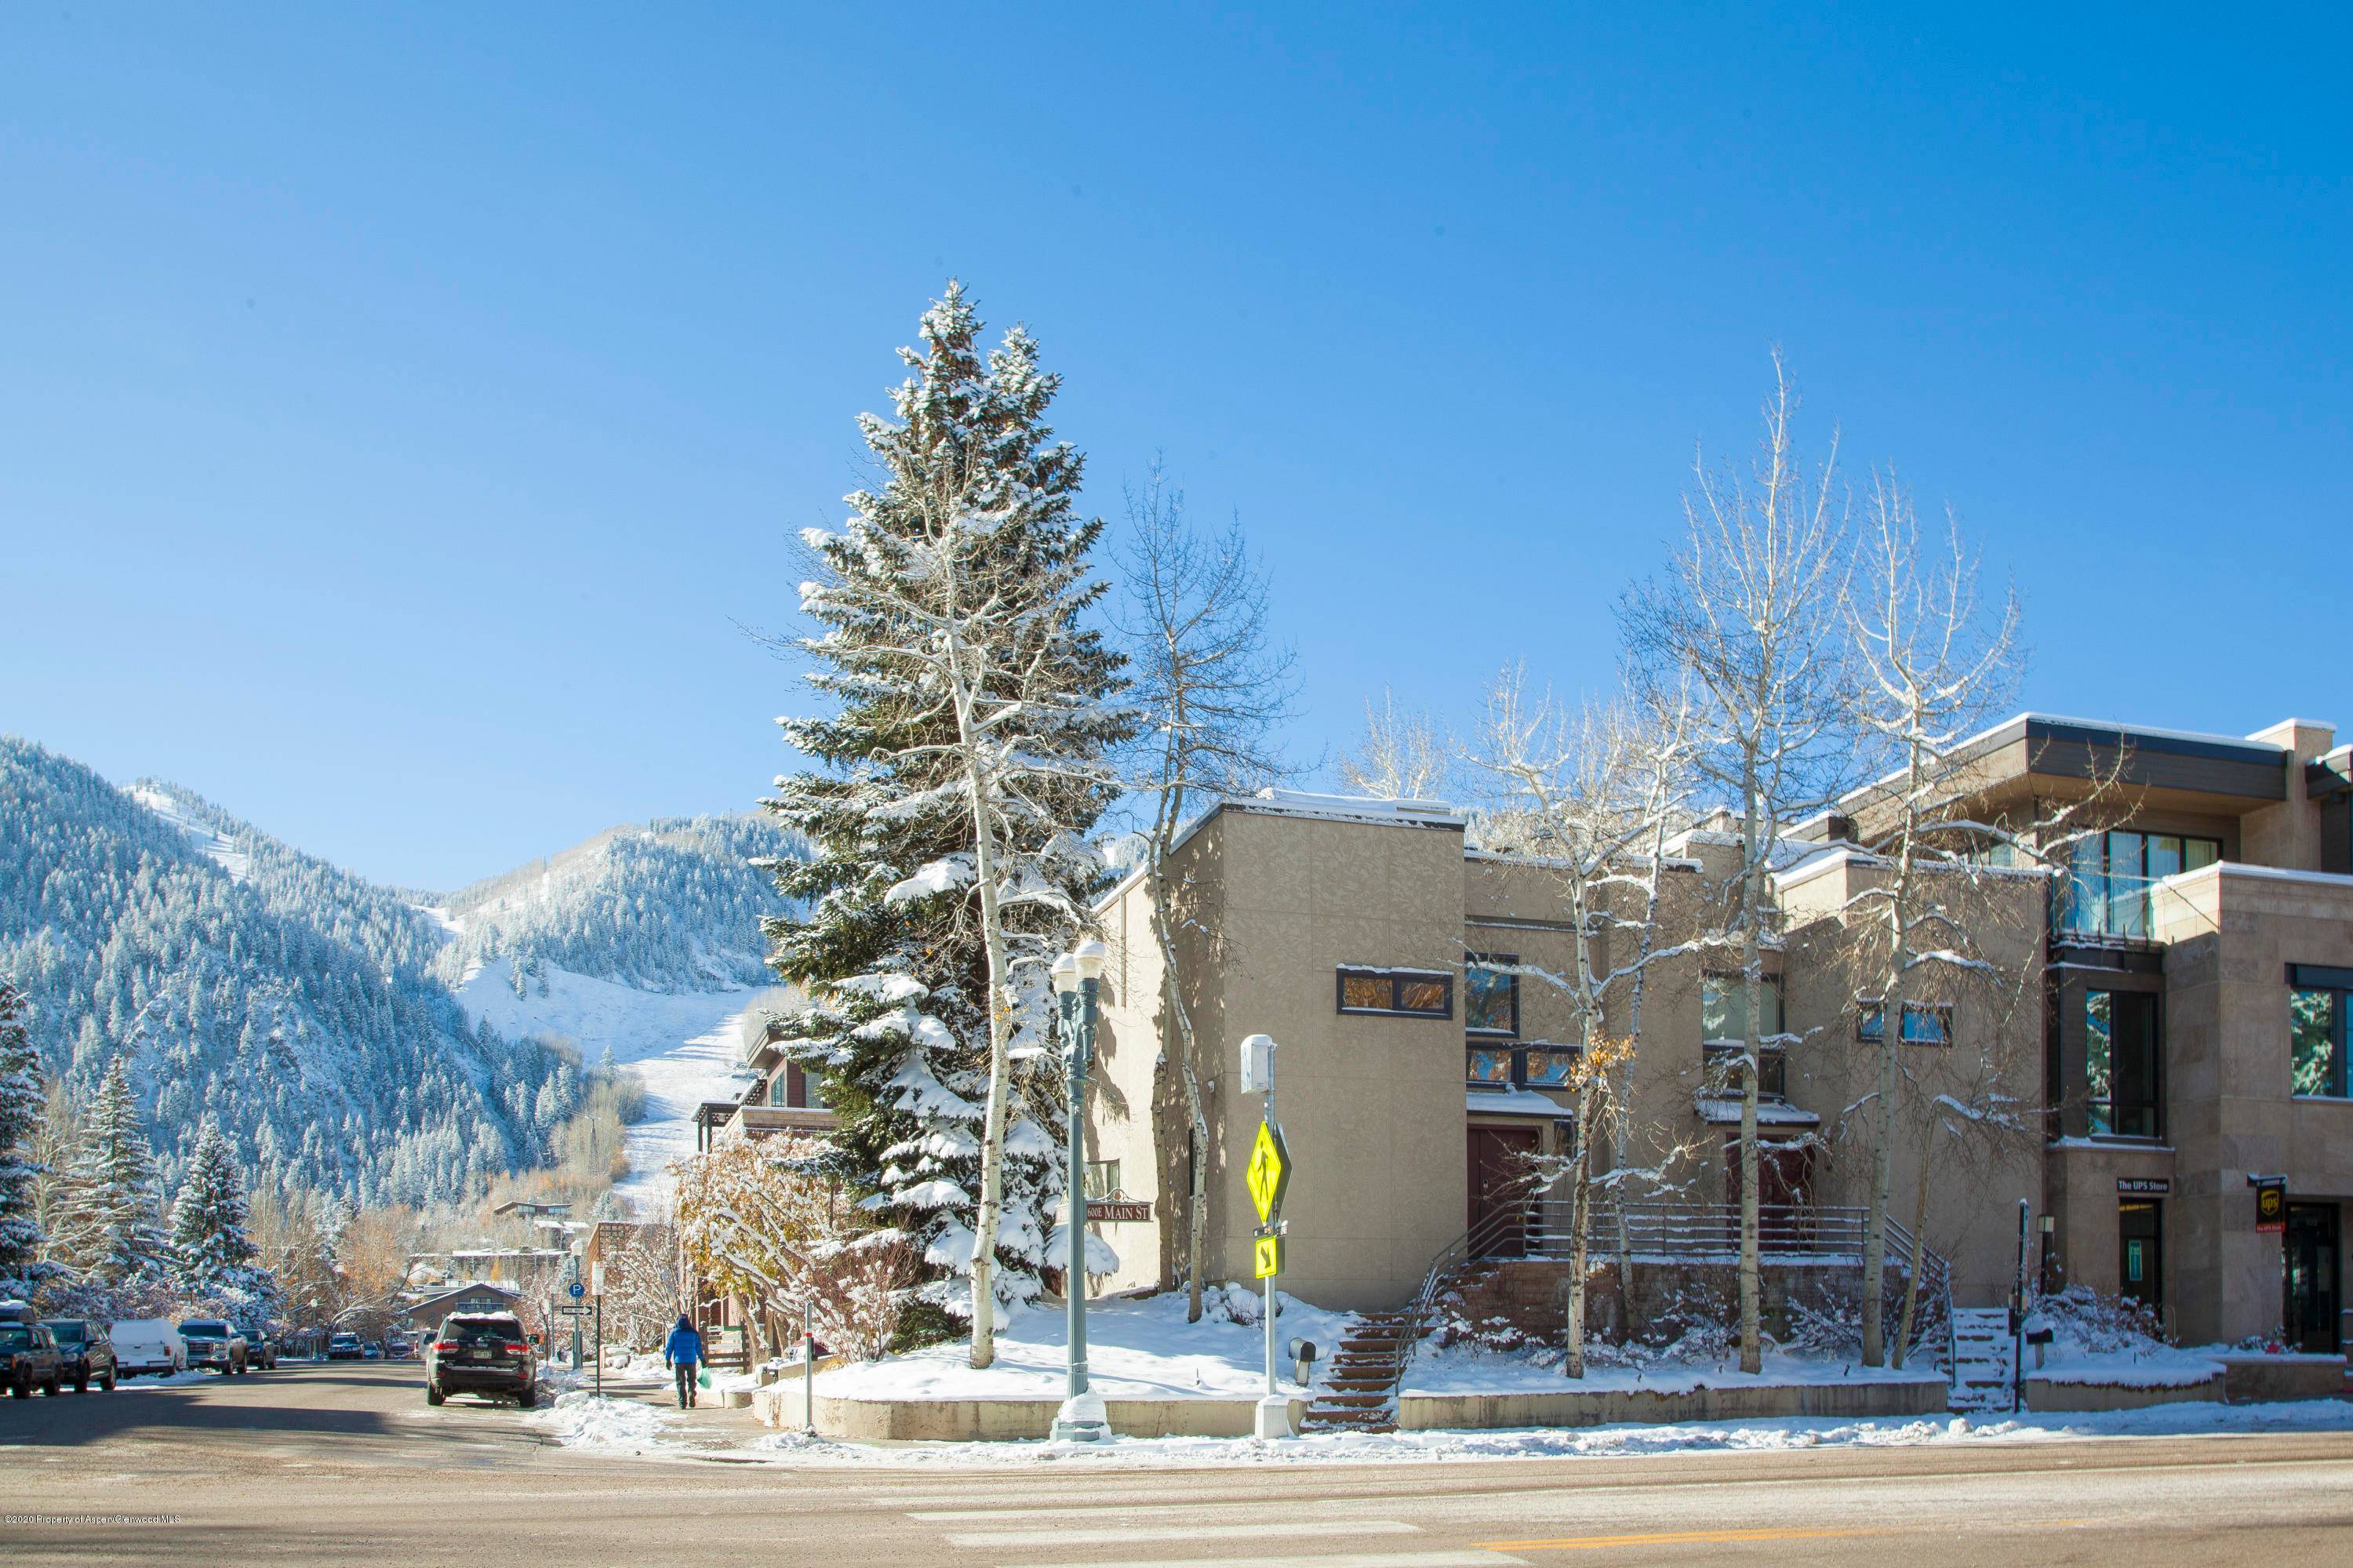 Rent this beautifully maintained two bedroom townhome for your next vacation to Aspen.